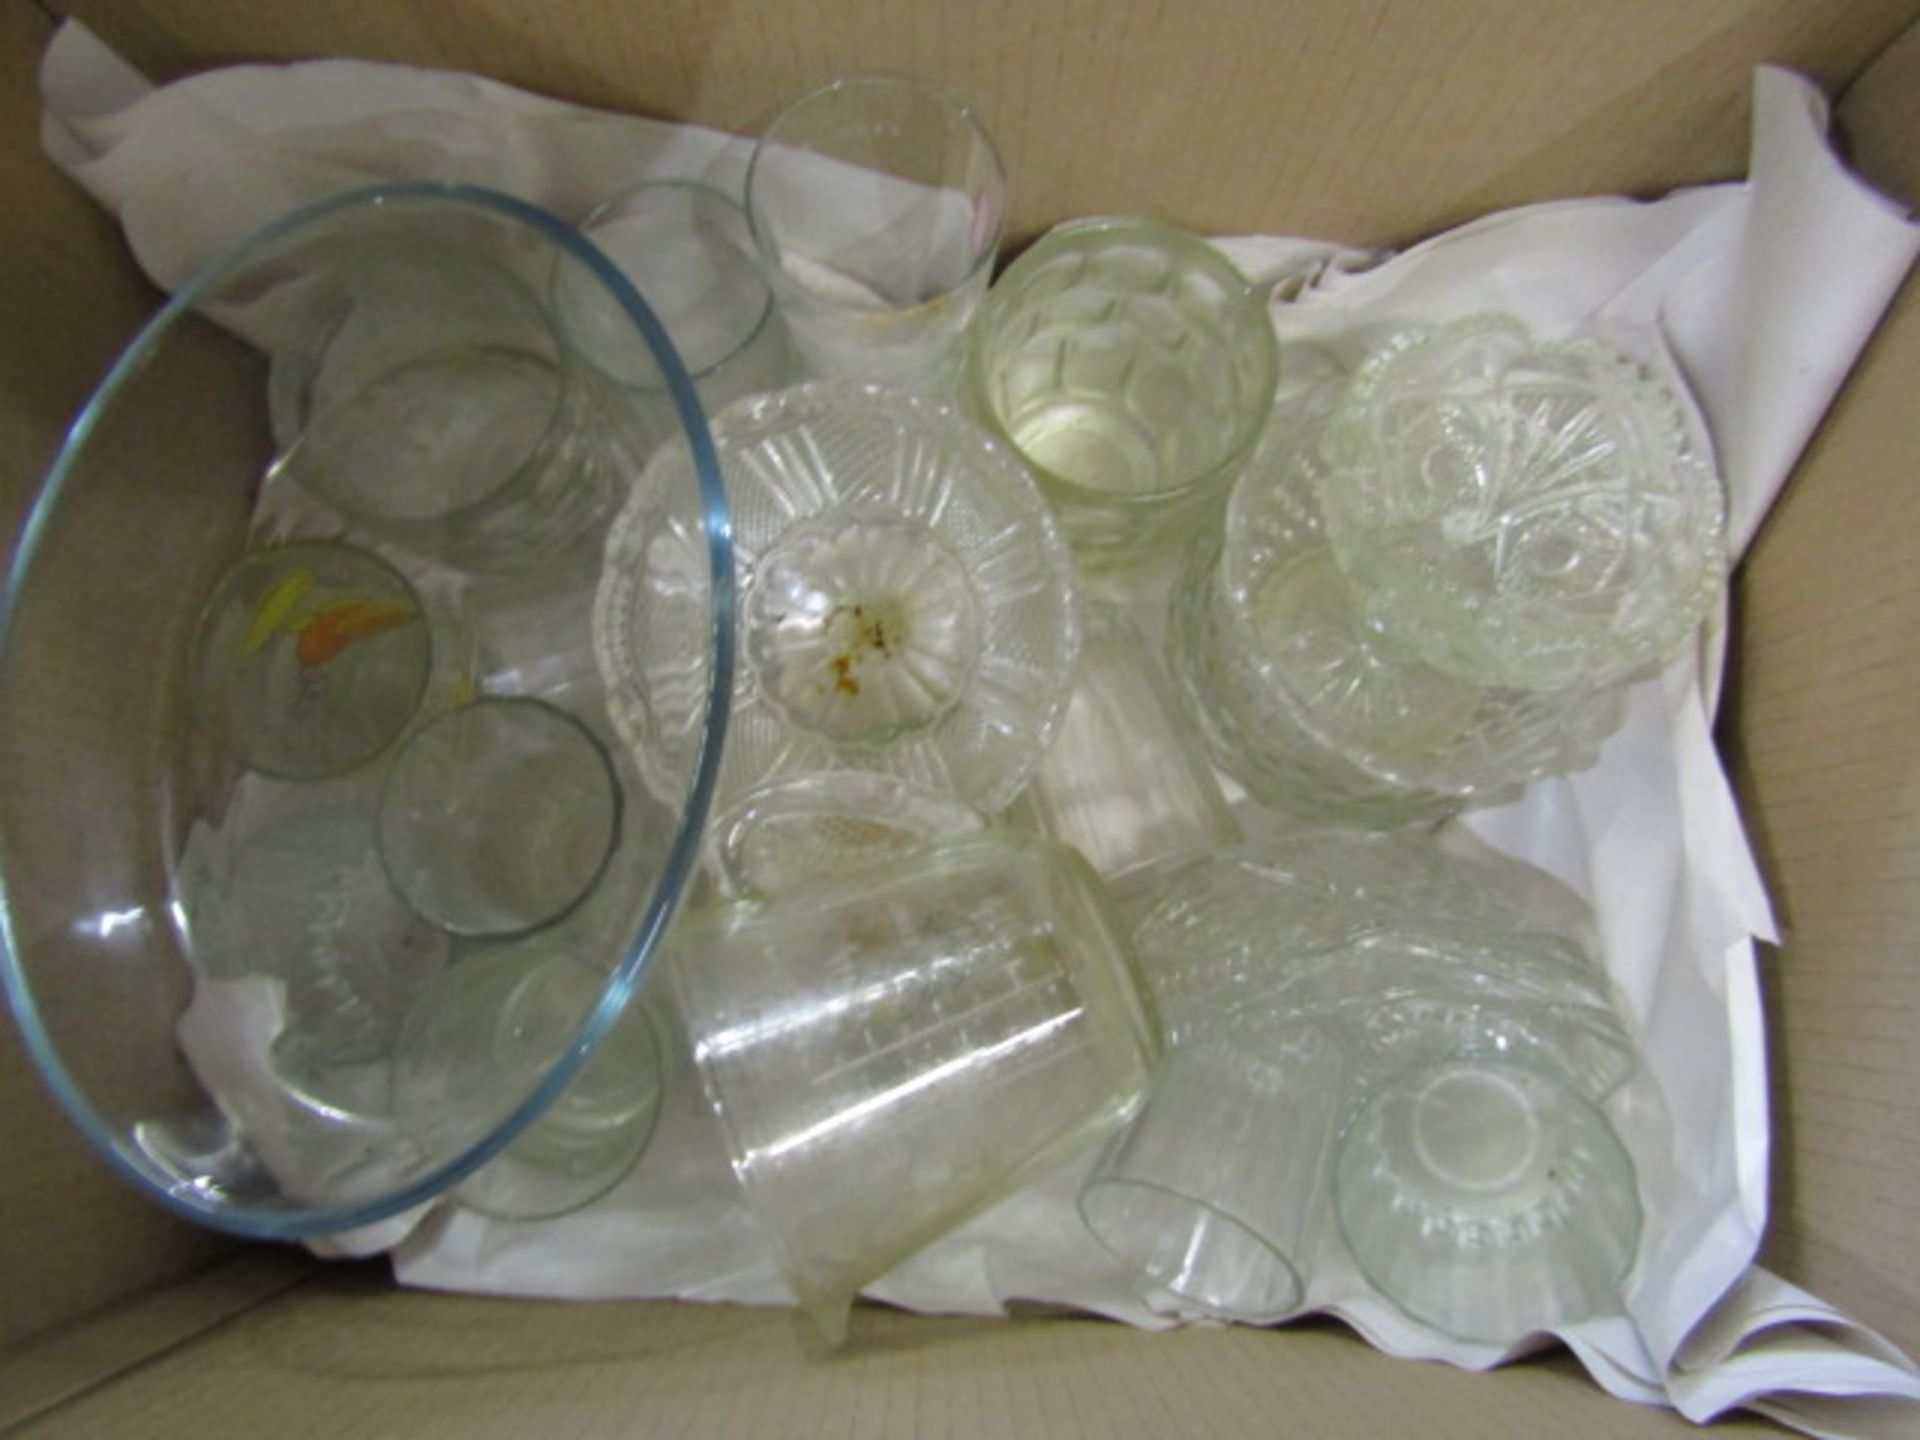 A stillage of china, glass and sundry items Stillage not included and all items must be removed - Image 13 of 15